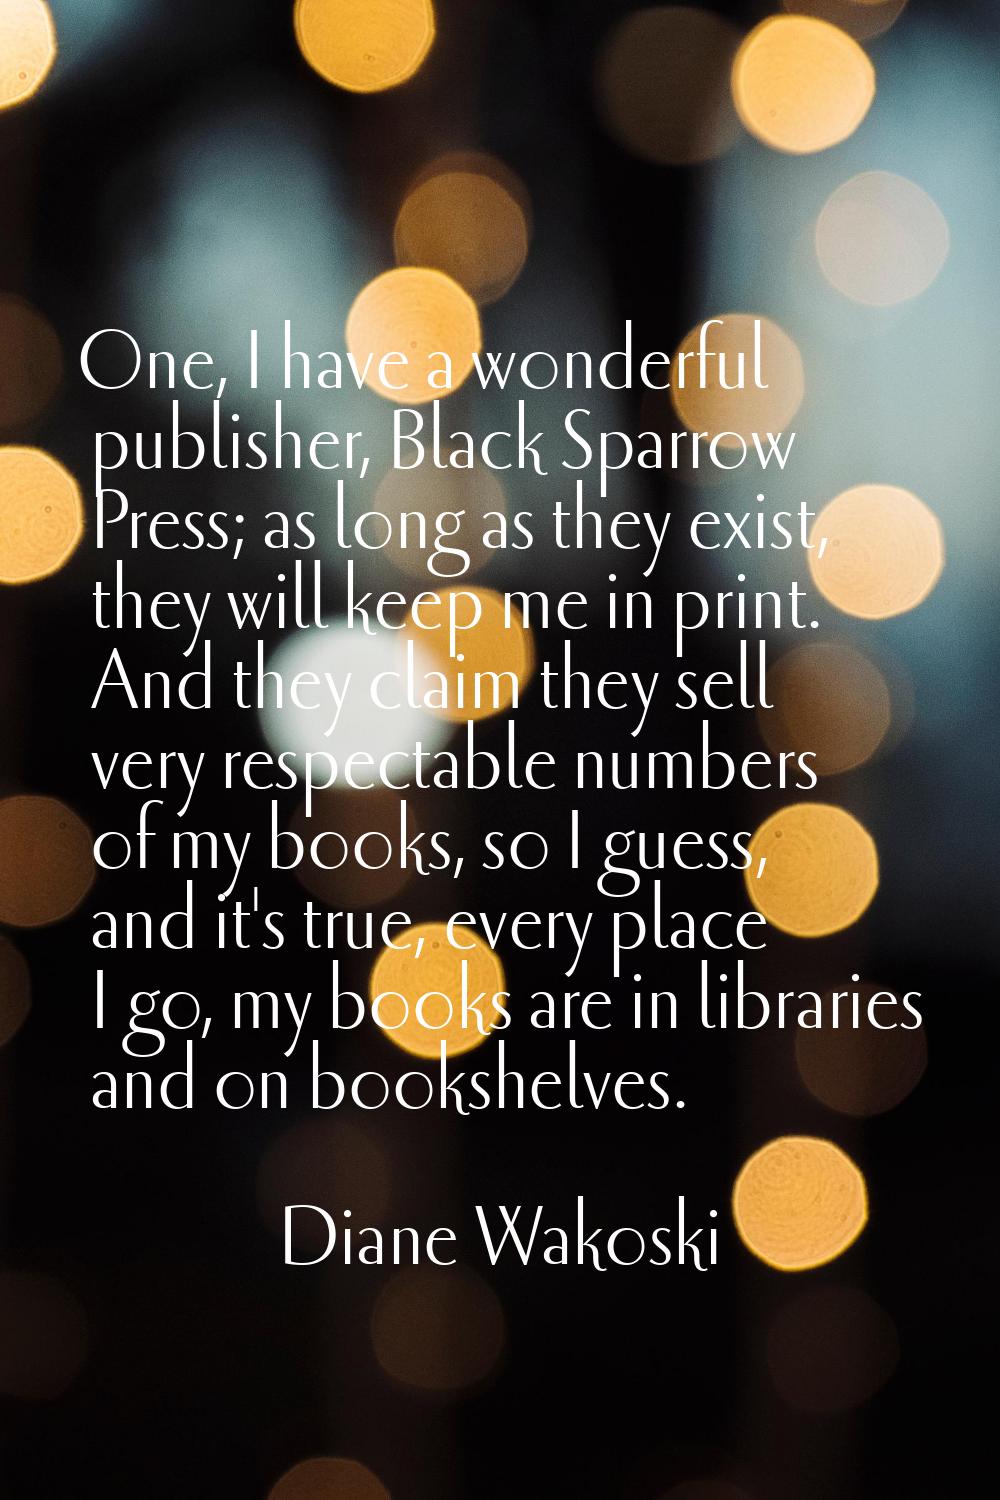 One, I have a wonderful publisher, Black Sparrow Press; as long as they exist, they will keep me in